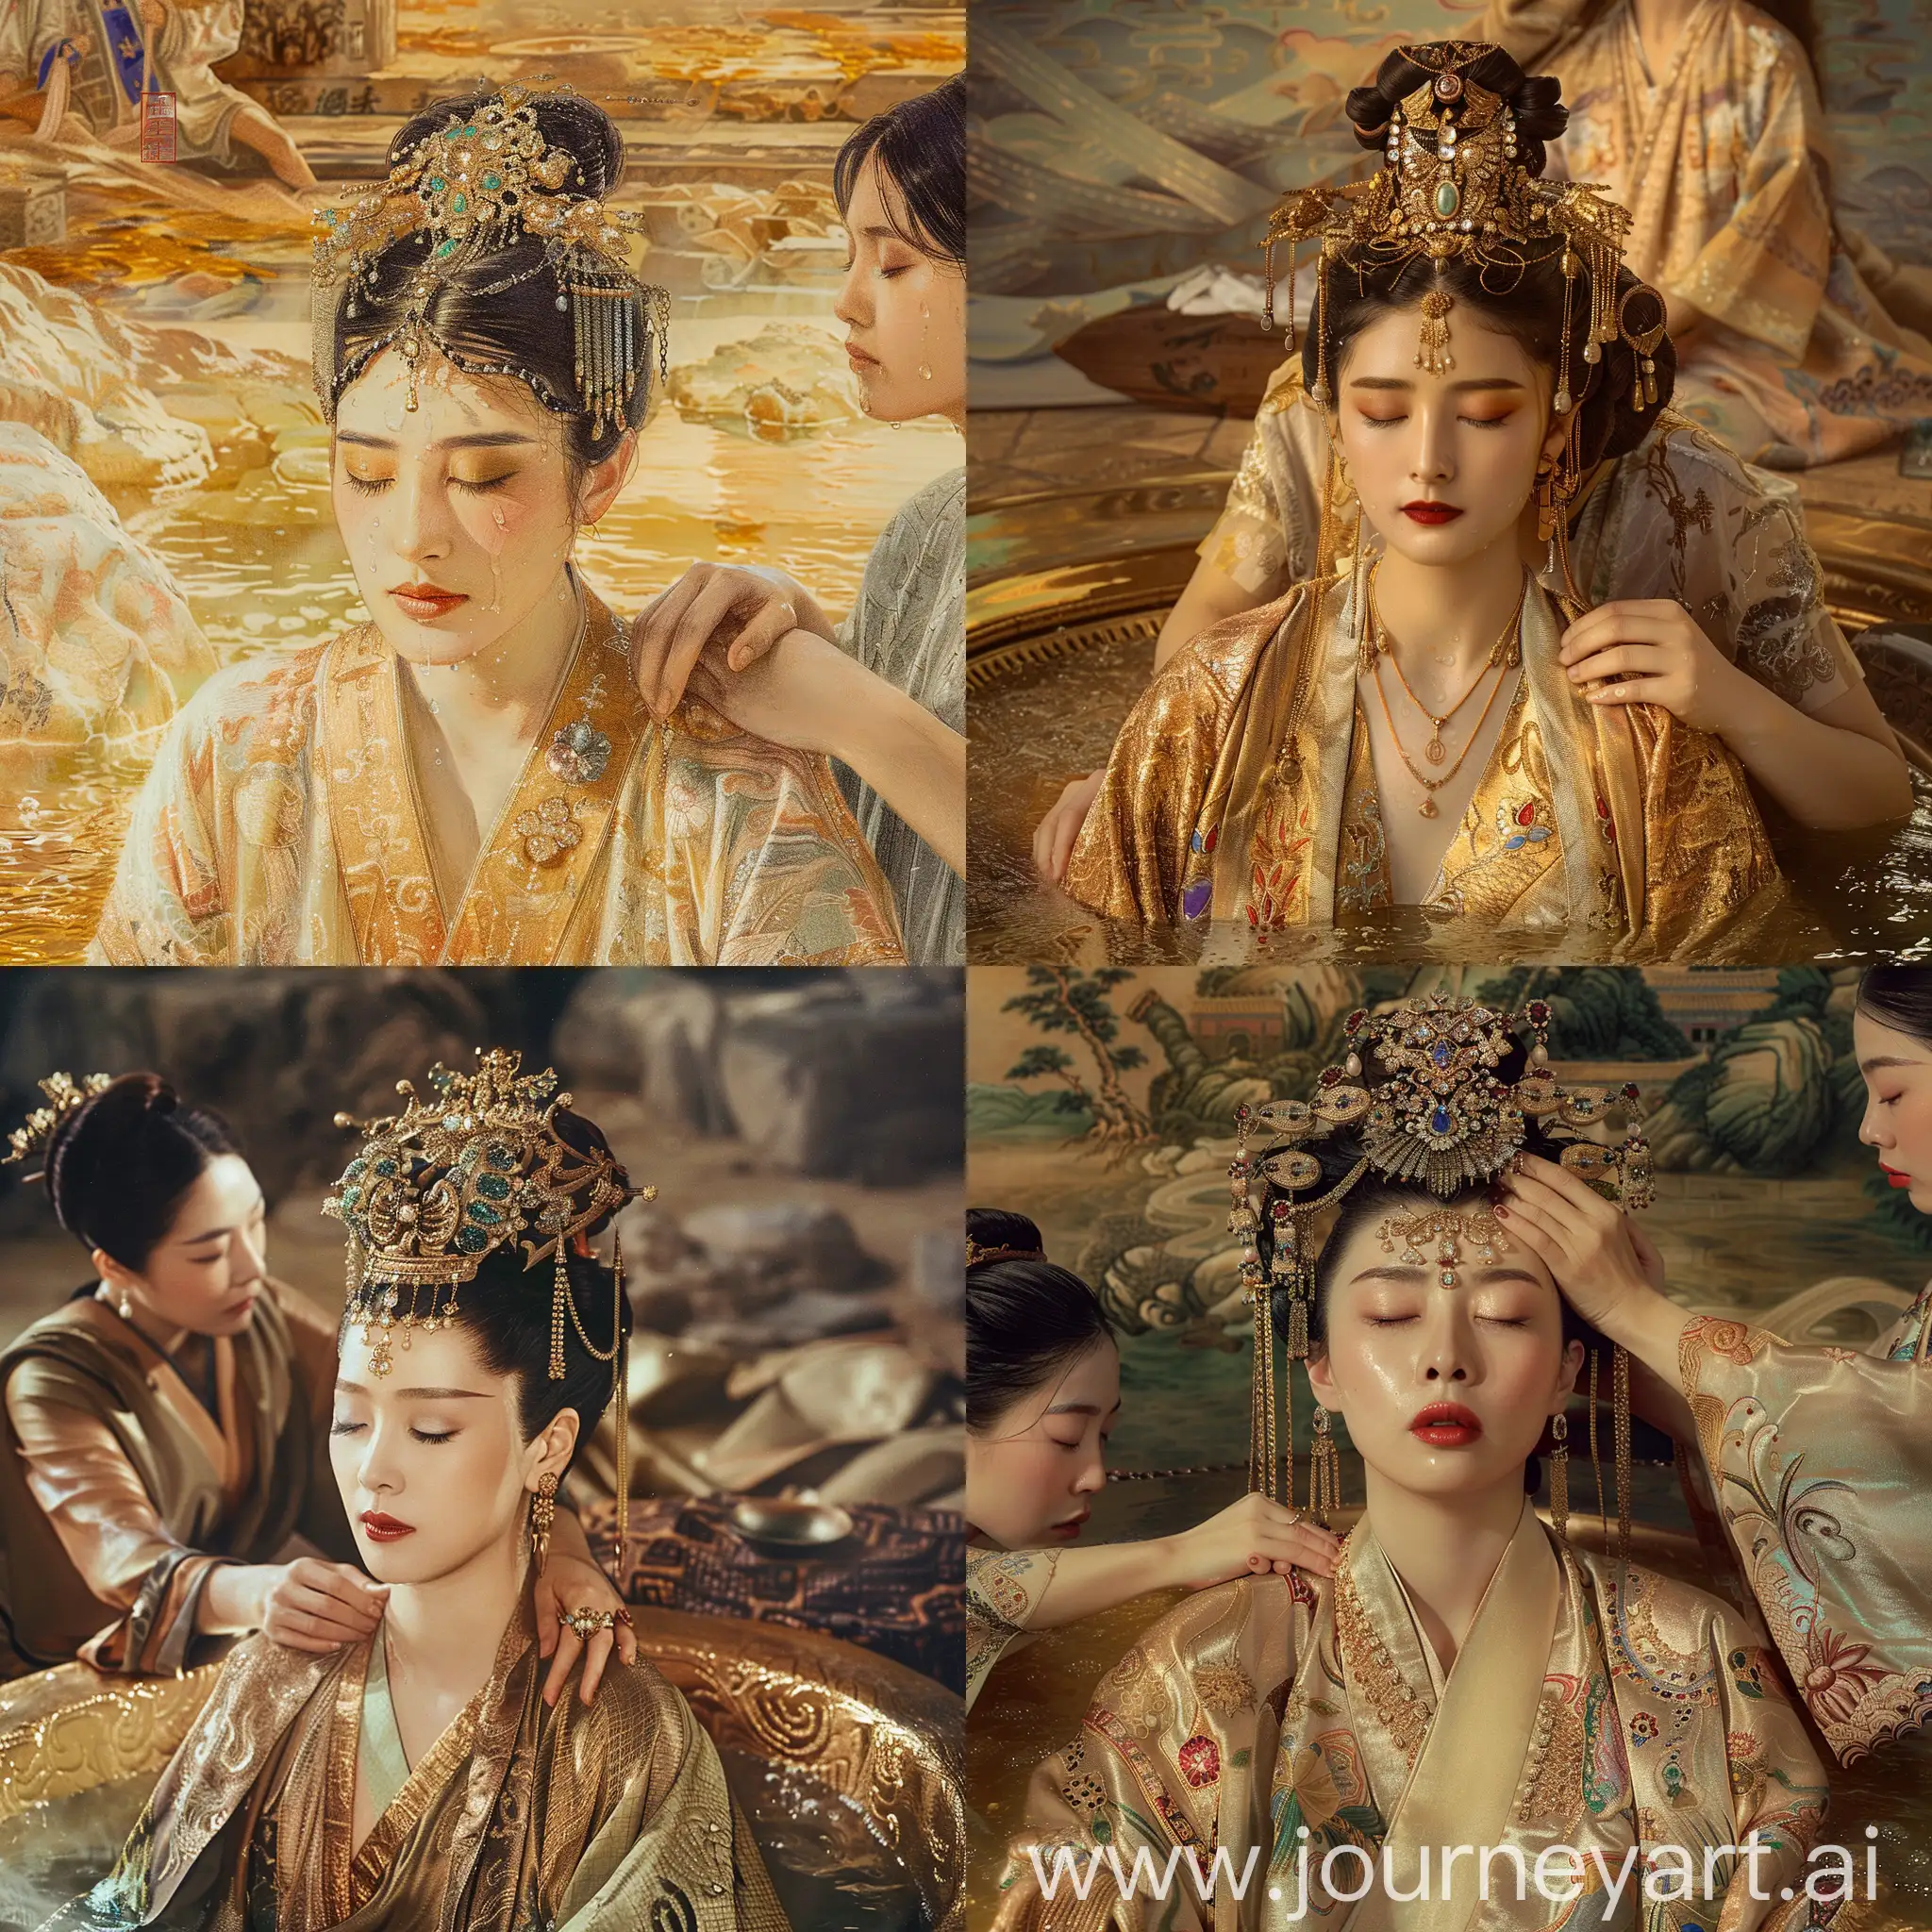 Dignified-Empress-of-China-Relaxing-in-Luxurious-Hot-Spring